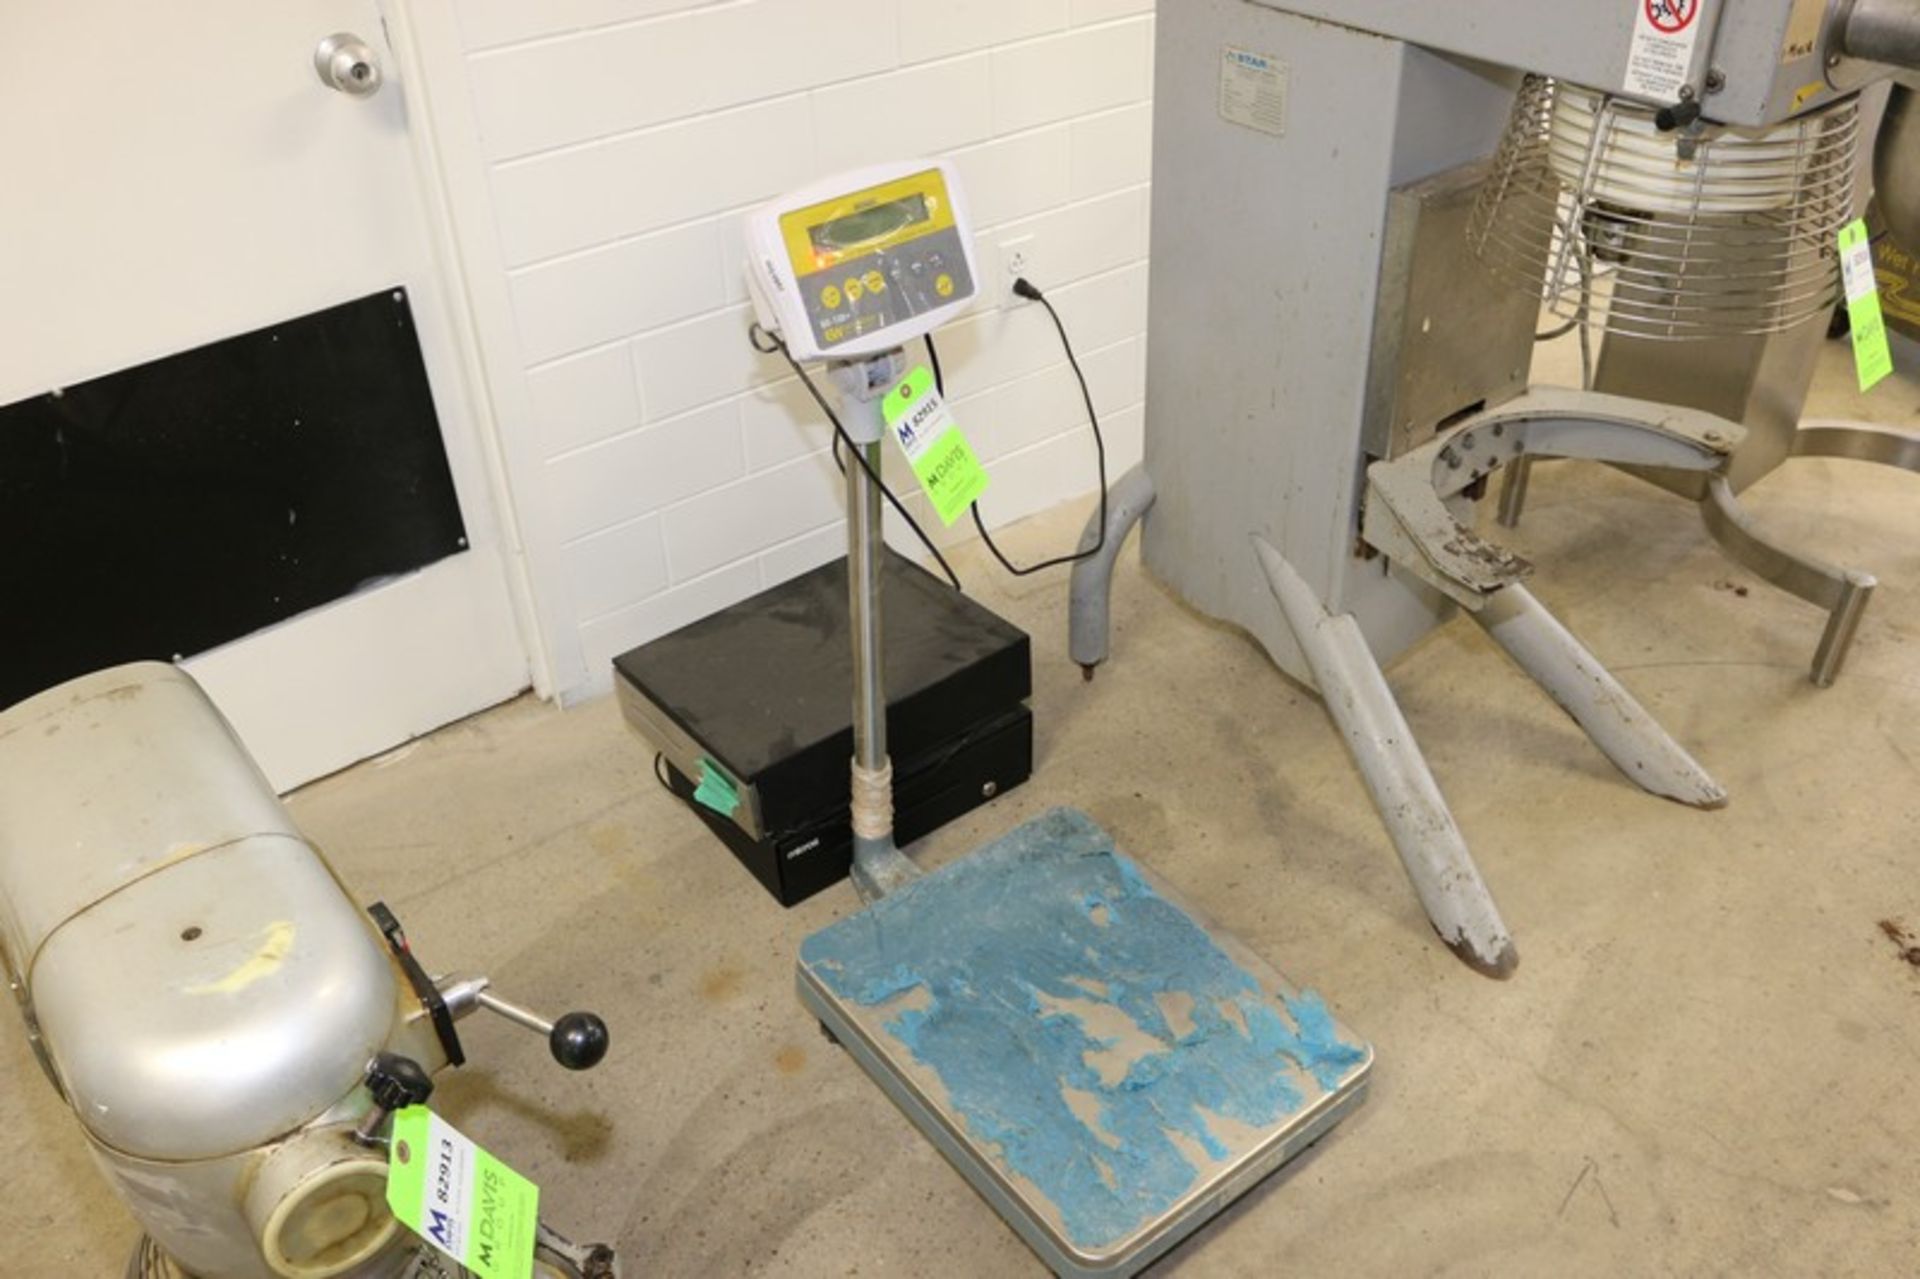 BW Easy Weigh Digital Platform Scale,M/N BX-120x, with (2) Micros Black Boxes, with Aprox. 20-1/2" L - Image 3 of 3